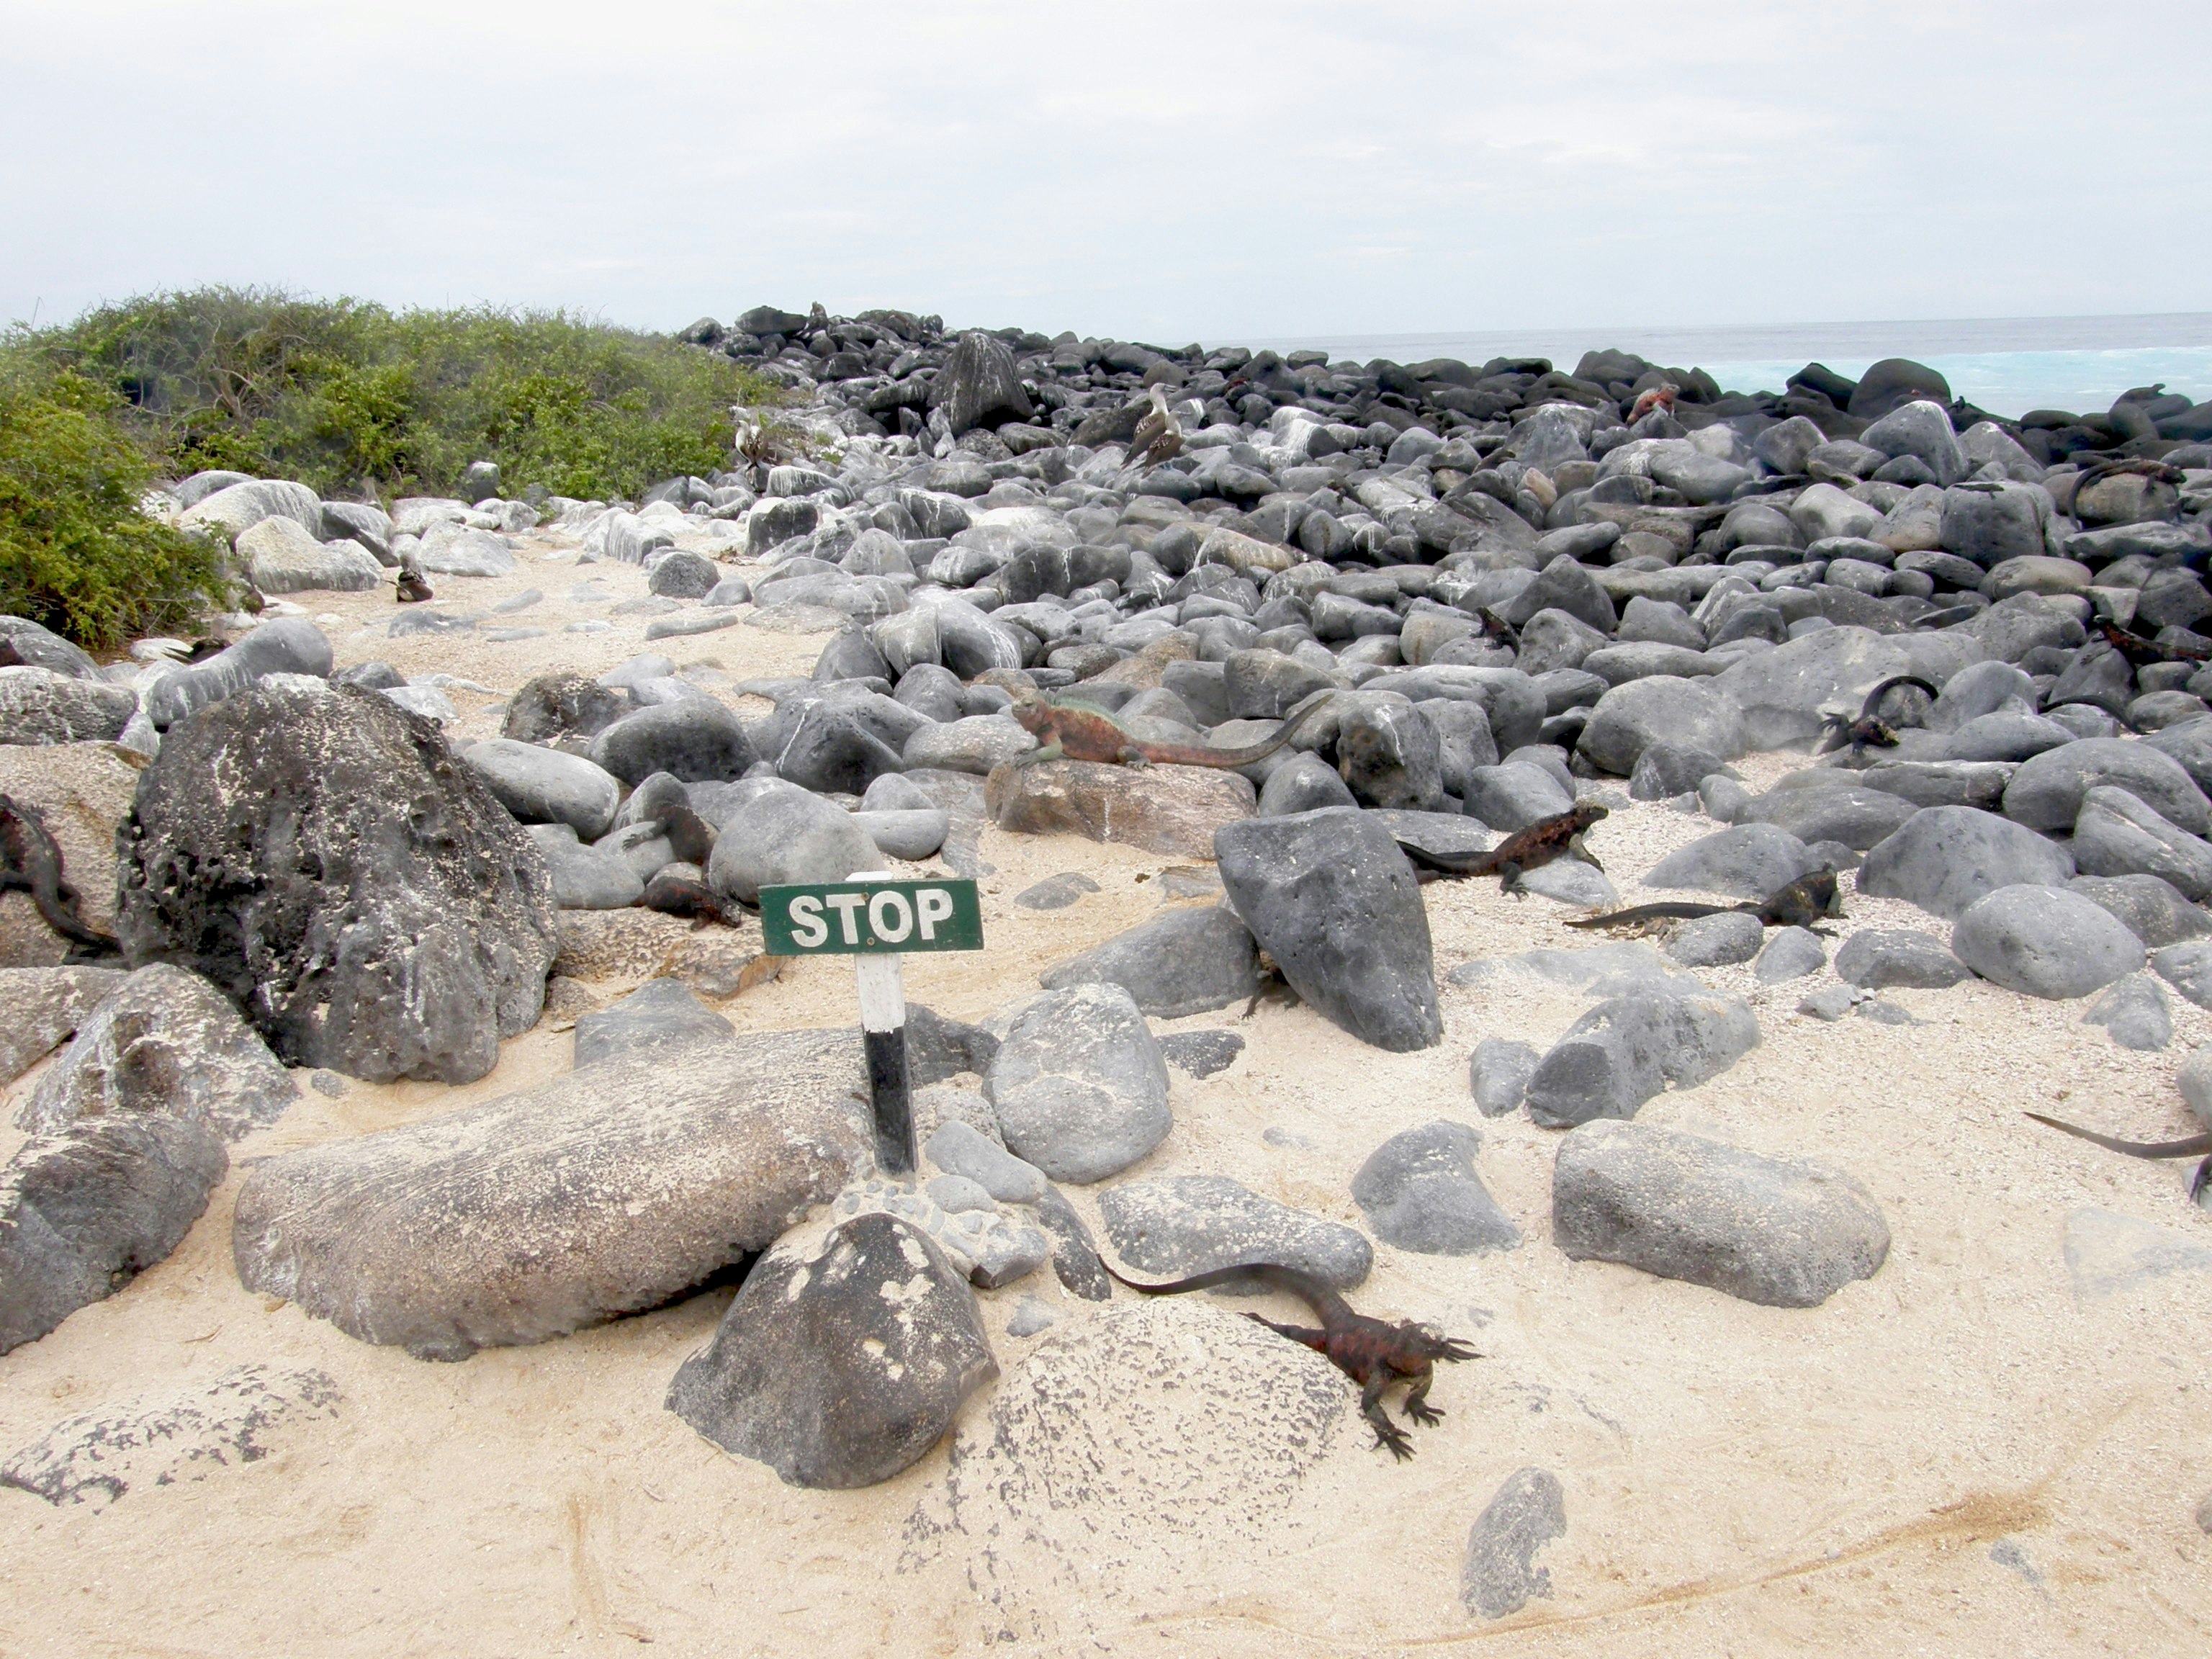 A stop sign on a rocky beach in the Galapagos Islands. Lizards crawl amongst the rocks.